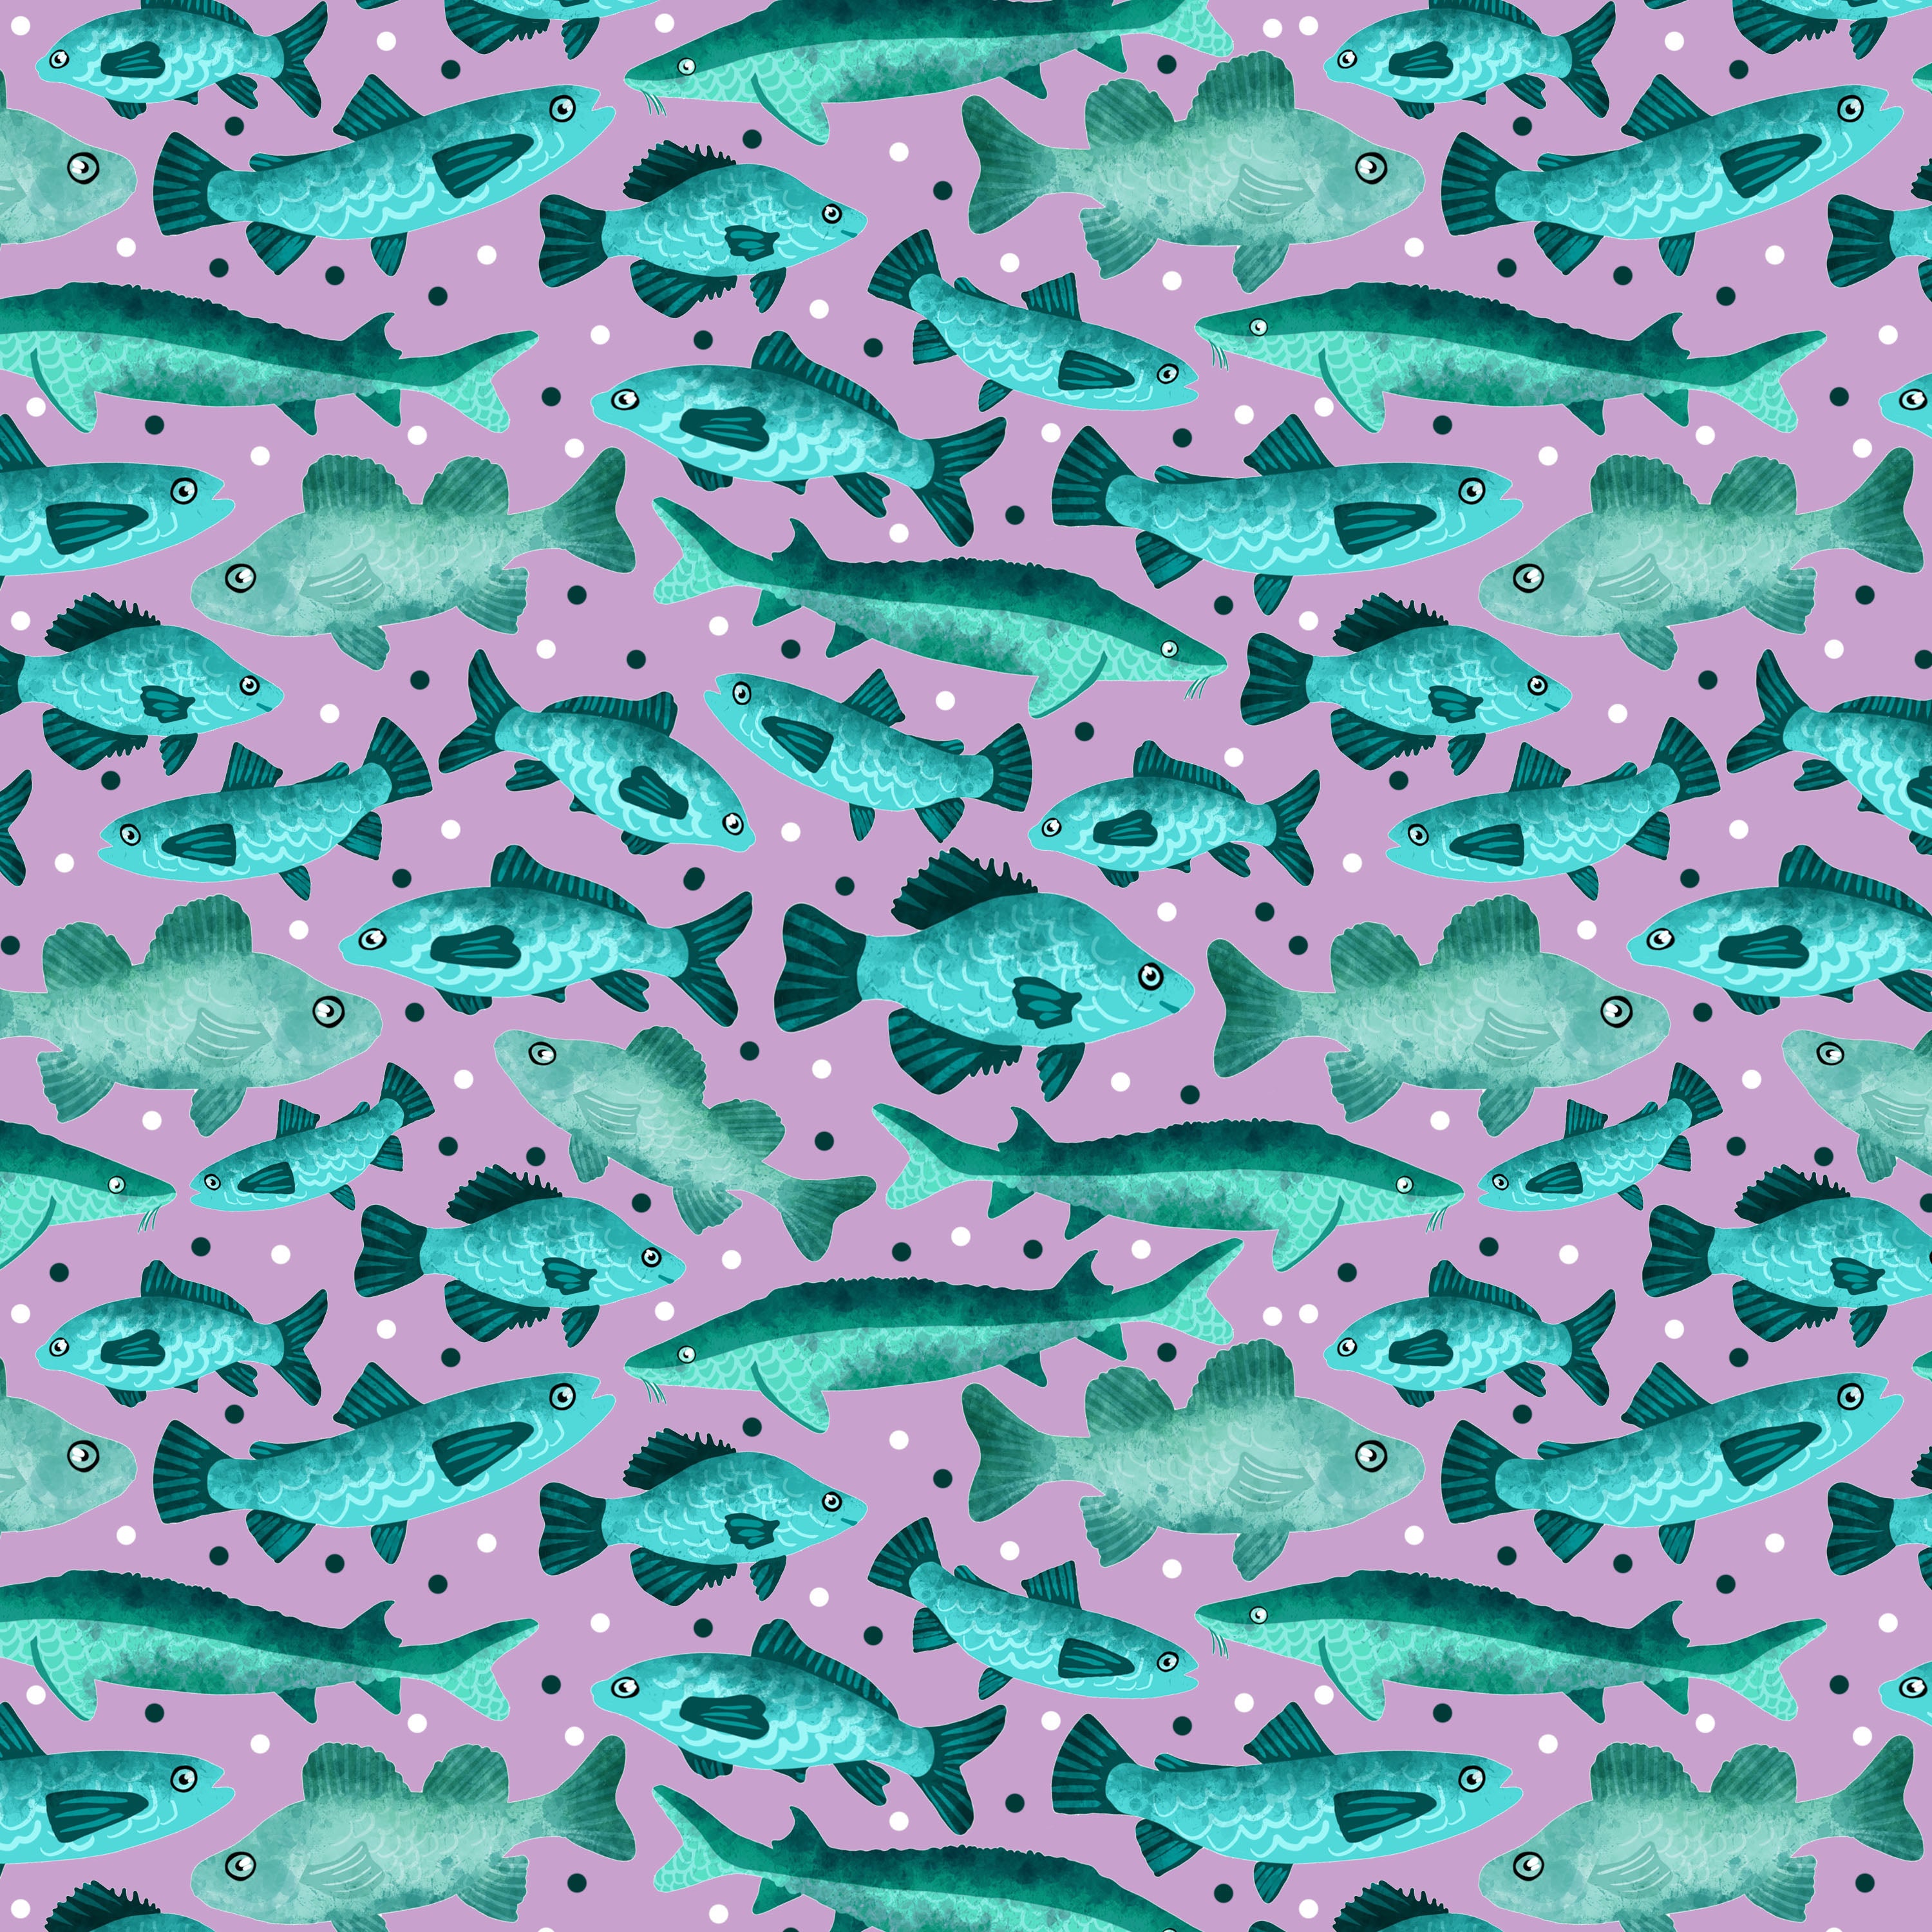 blue surface pattern design with fishes